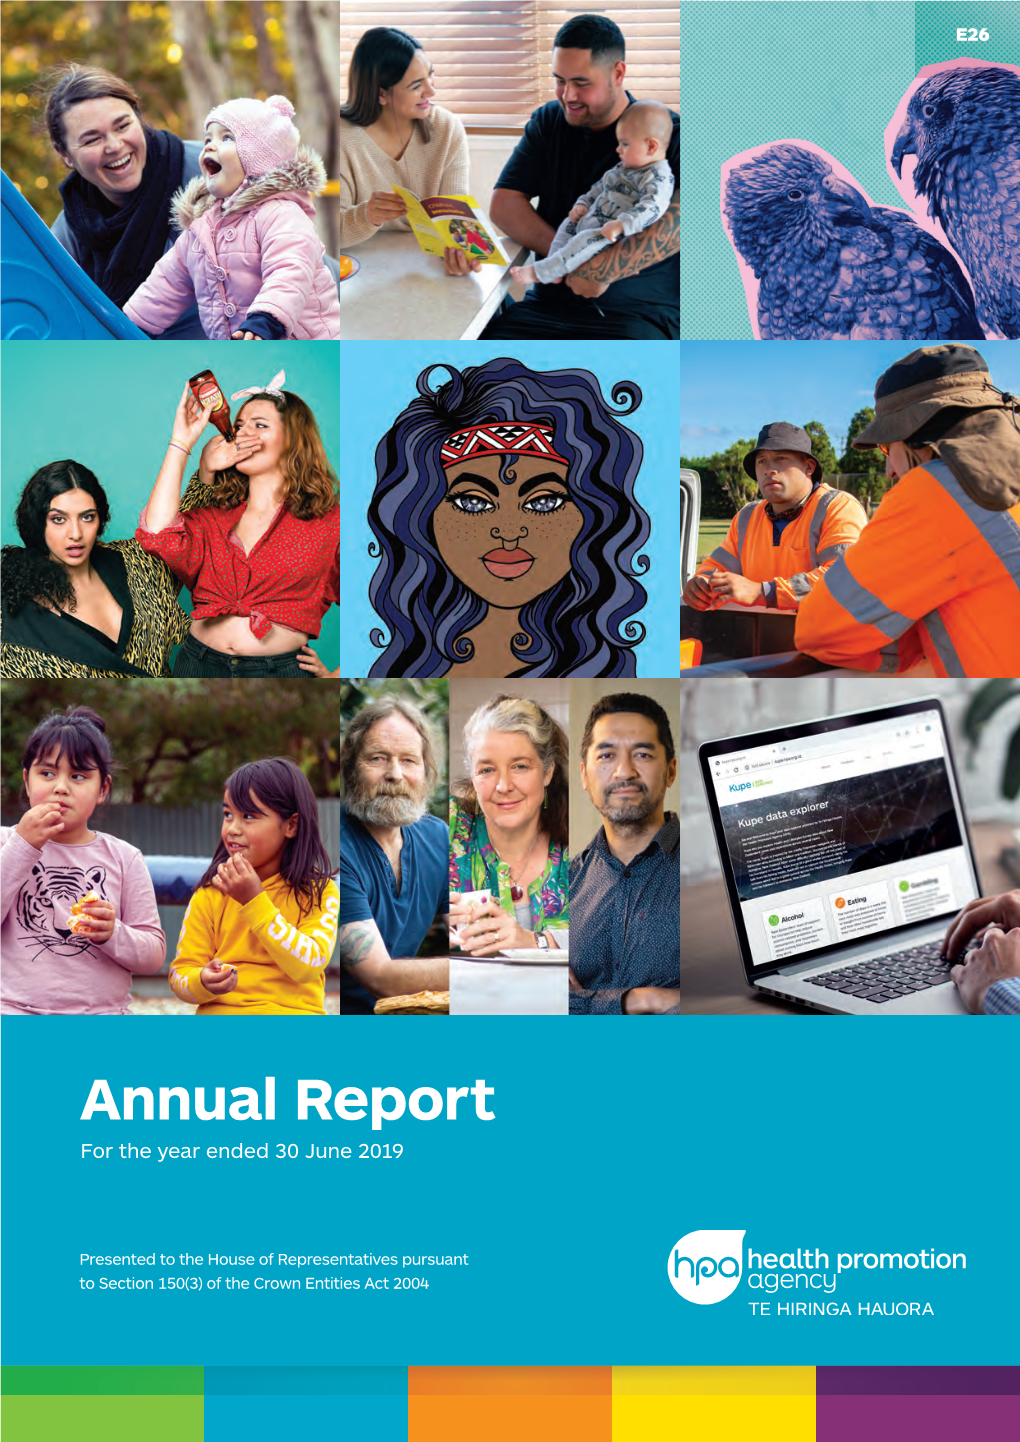 Health Promotion Agency Annual Report 2018/19